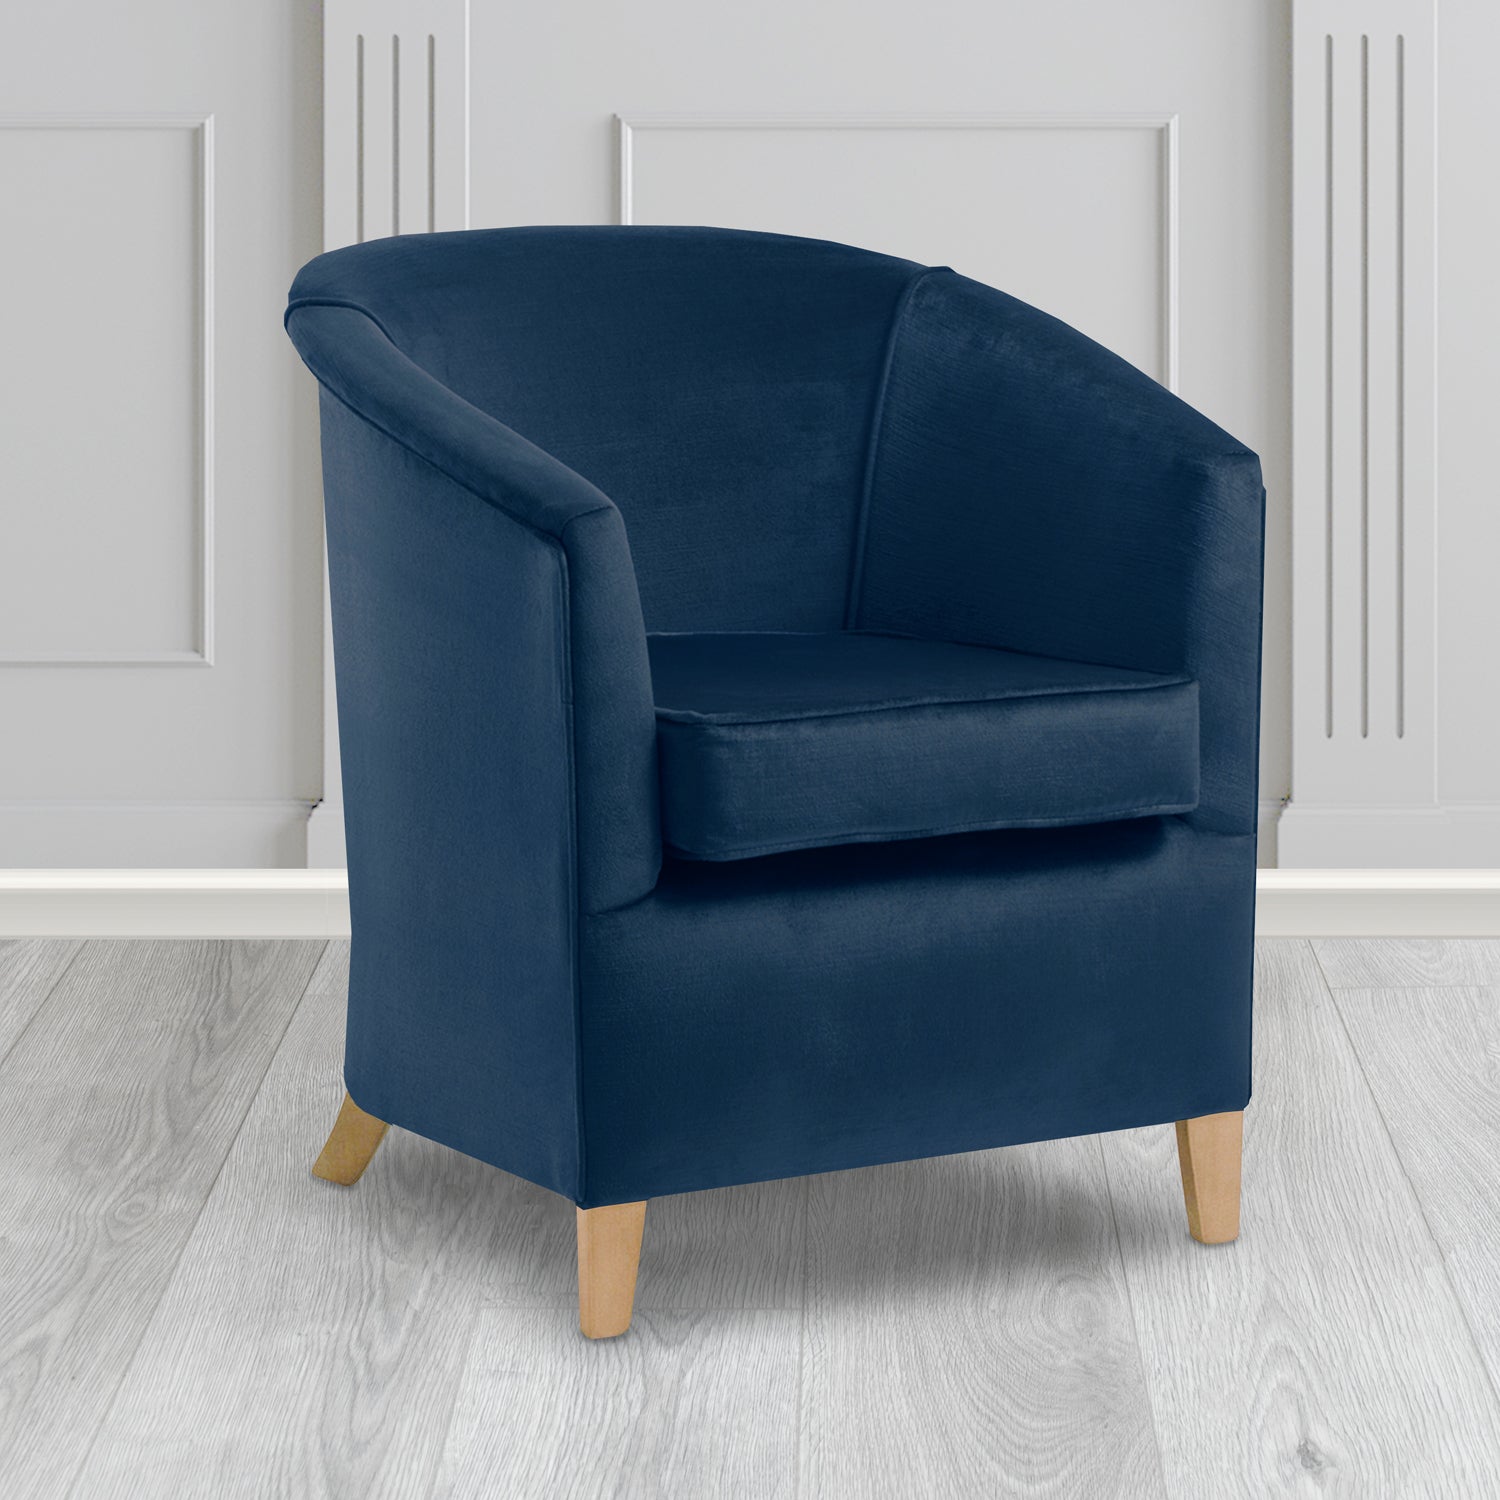 Jasmine Tub Chair in Noble 133 Sapphire Crib 5 Velvet Fabric - Water Resistant - The Tub Chair Shop